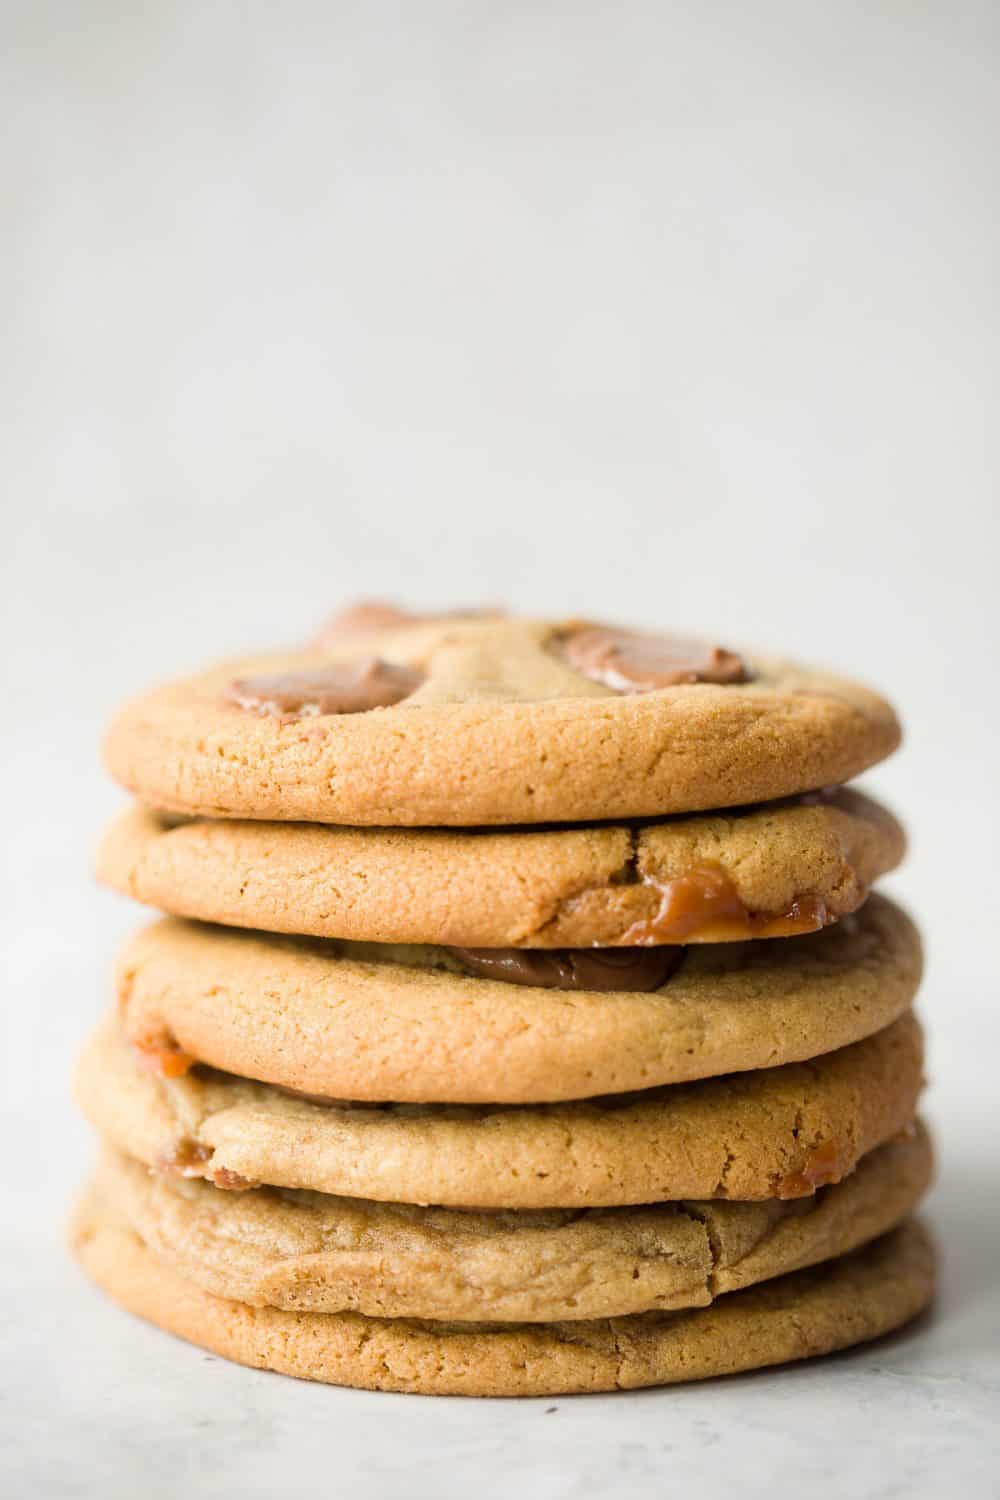 A stack of 6 large cookies. 